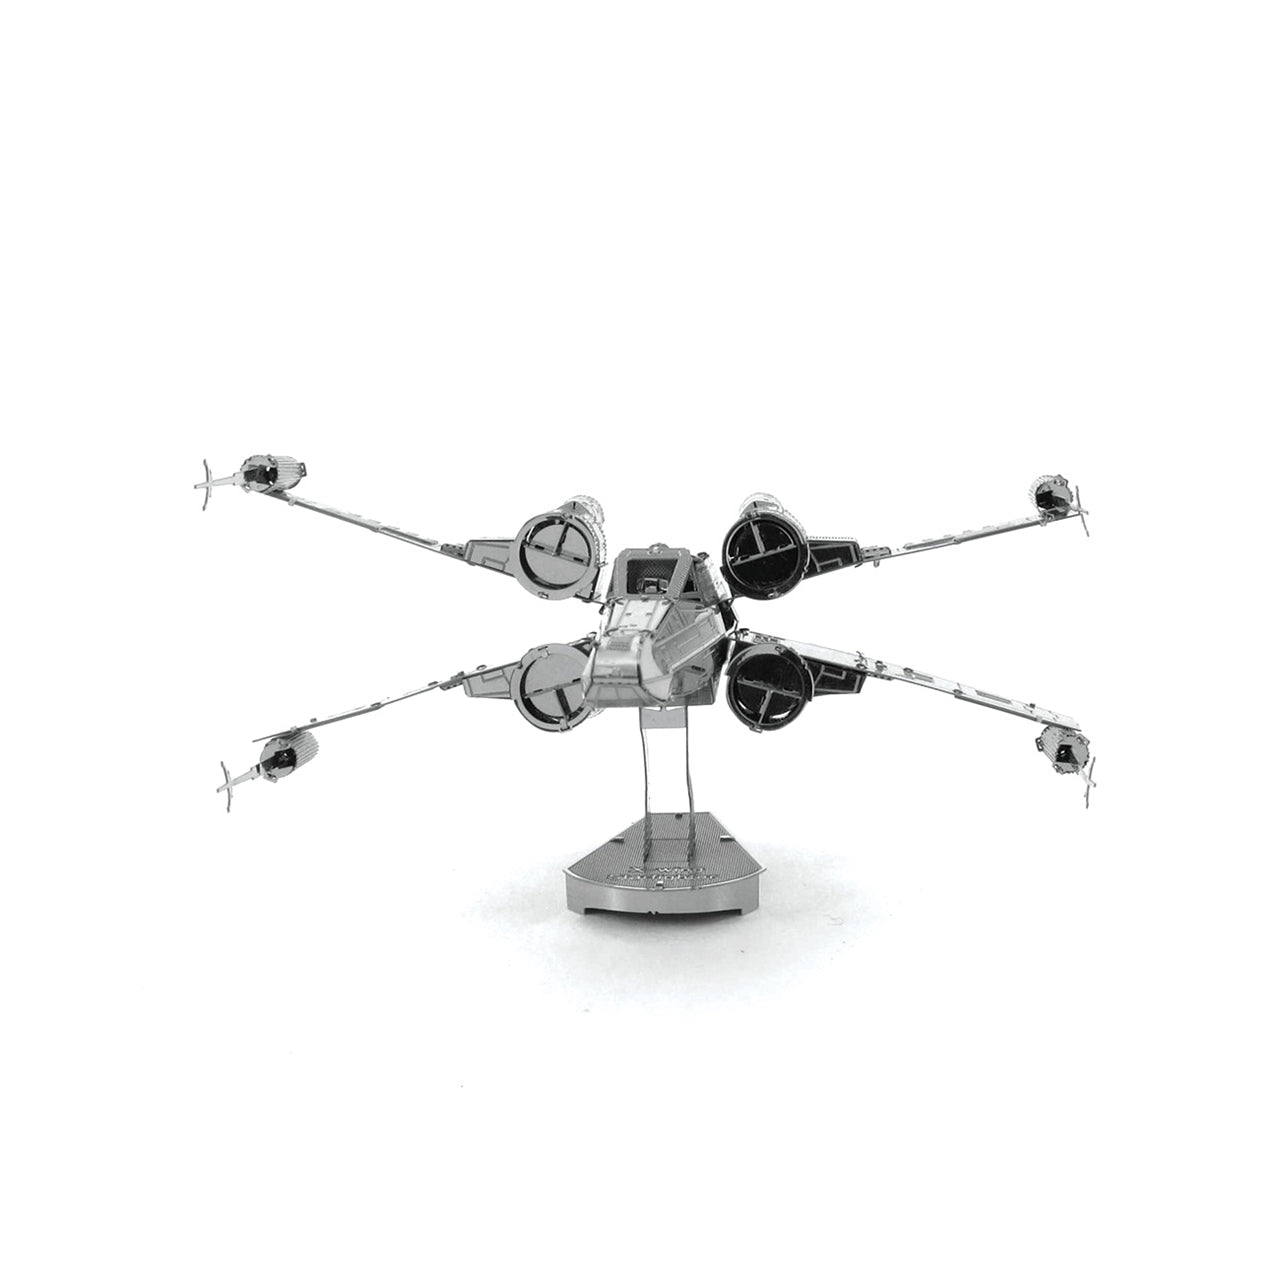 FMW257 X-Wing Starfighter (Buildable) (Discontinued Model)